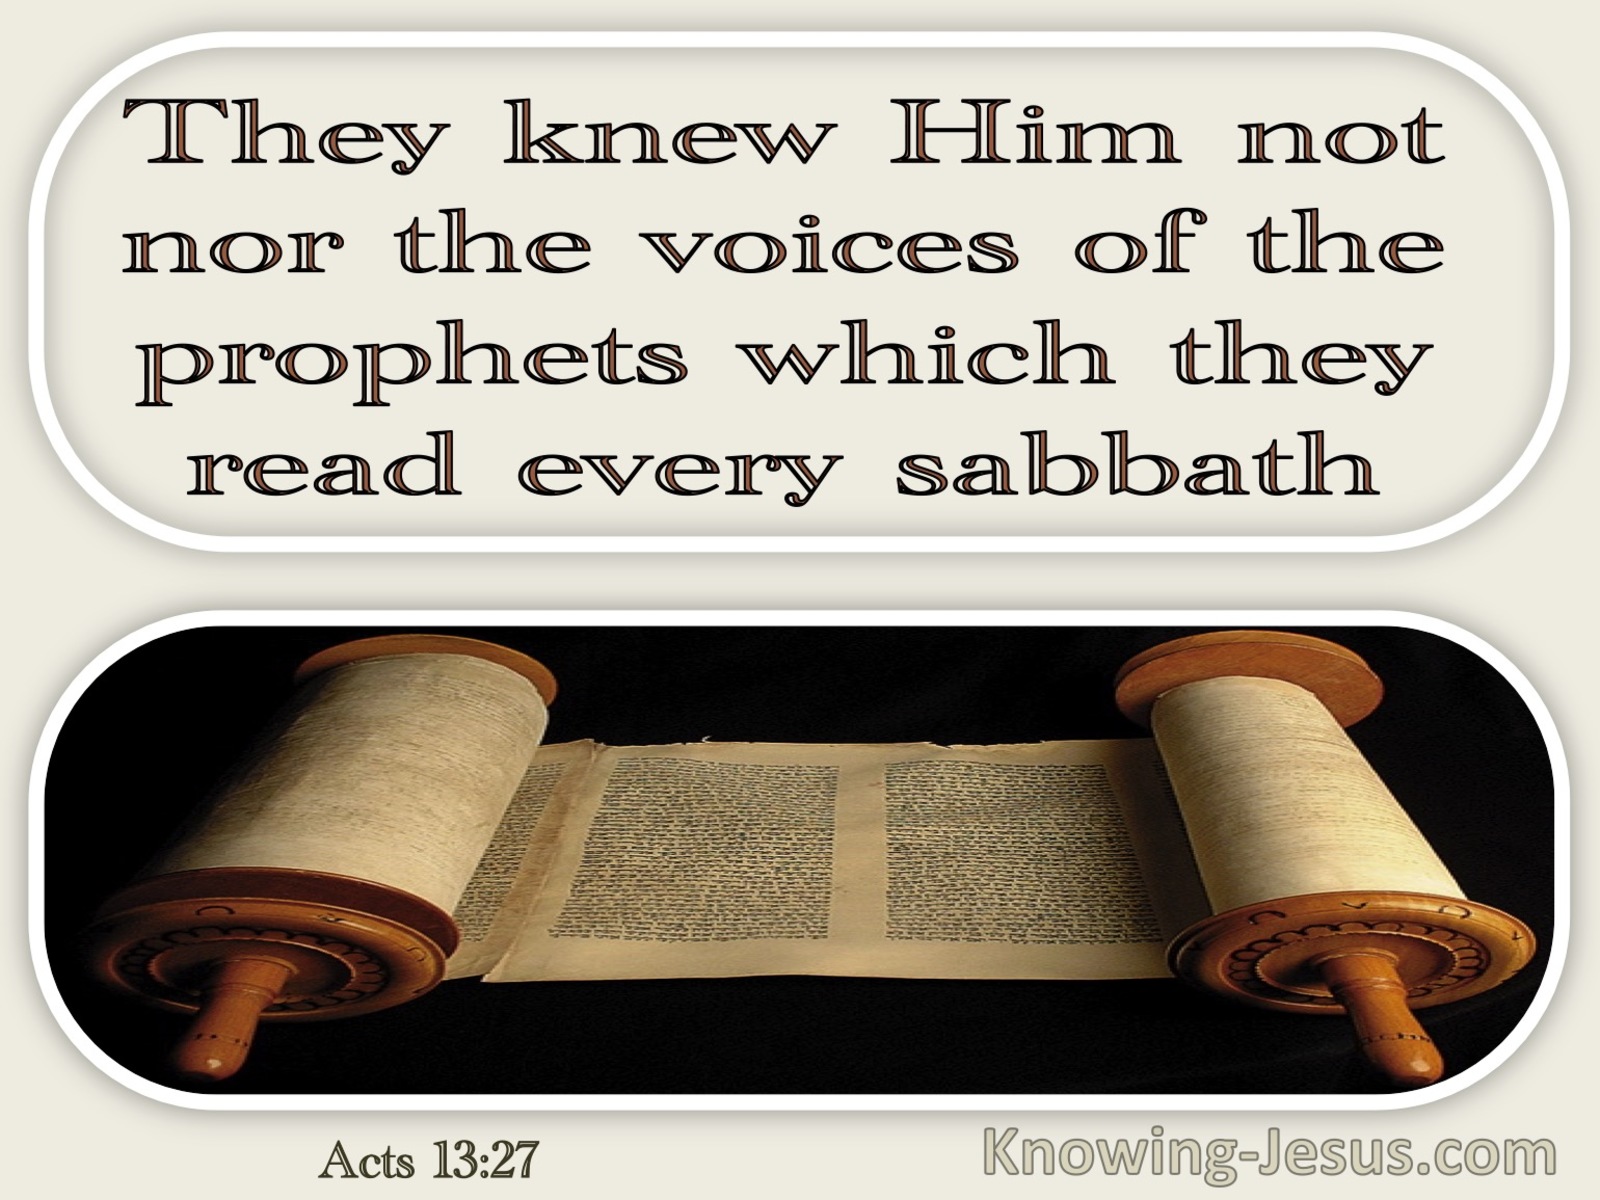 Acts 13:27 They Knew Him Not Nor The Voices Of The Prophets (windows)02:06